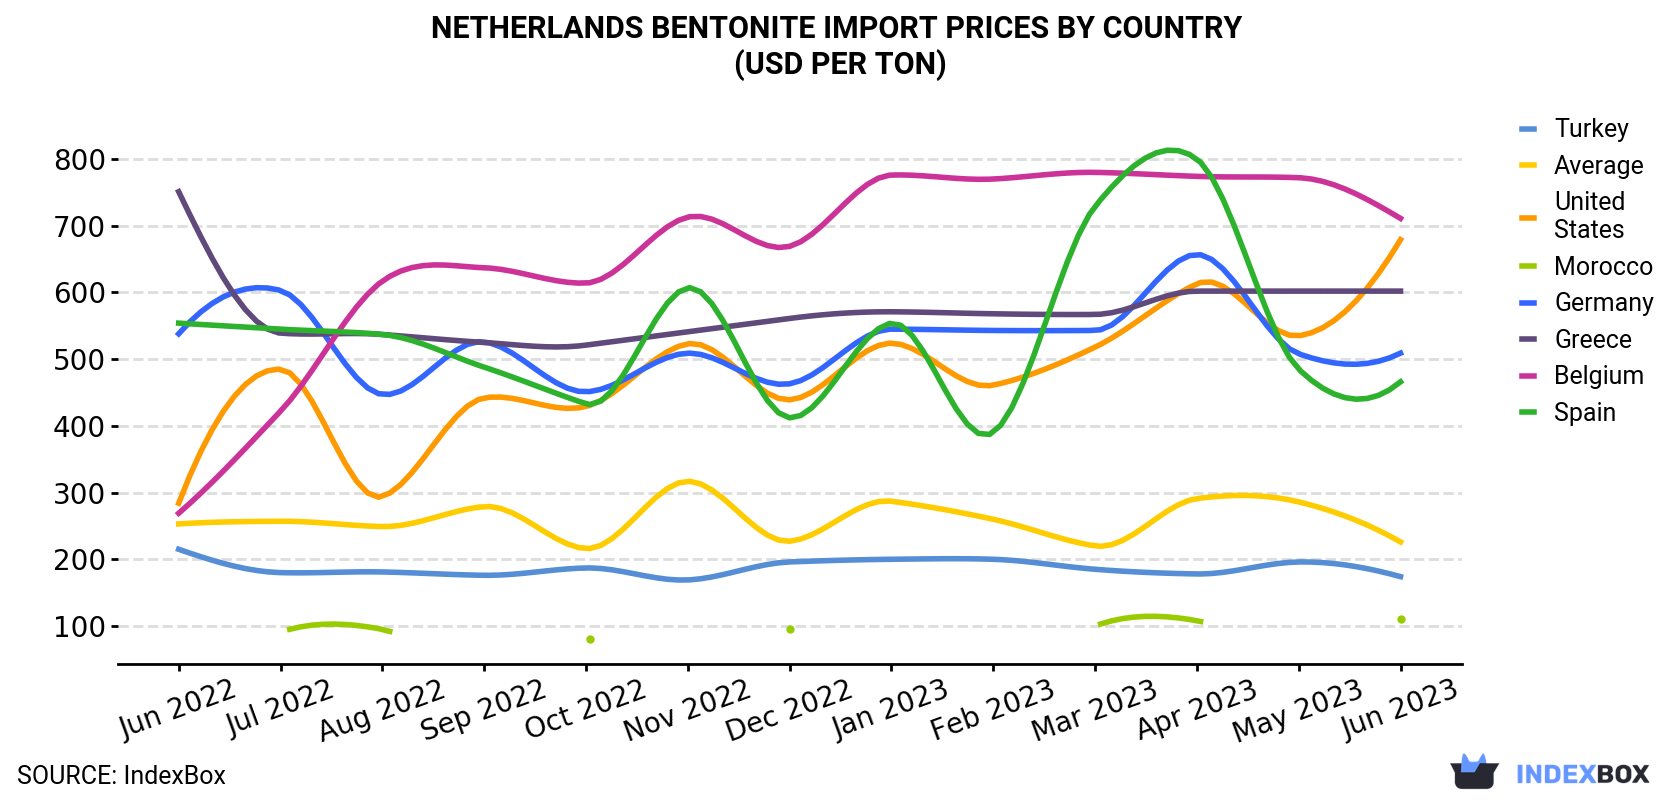 Netherlands Bentonite Import Prices By Country (USD Per Ton)